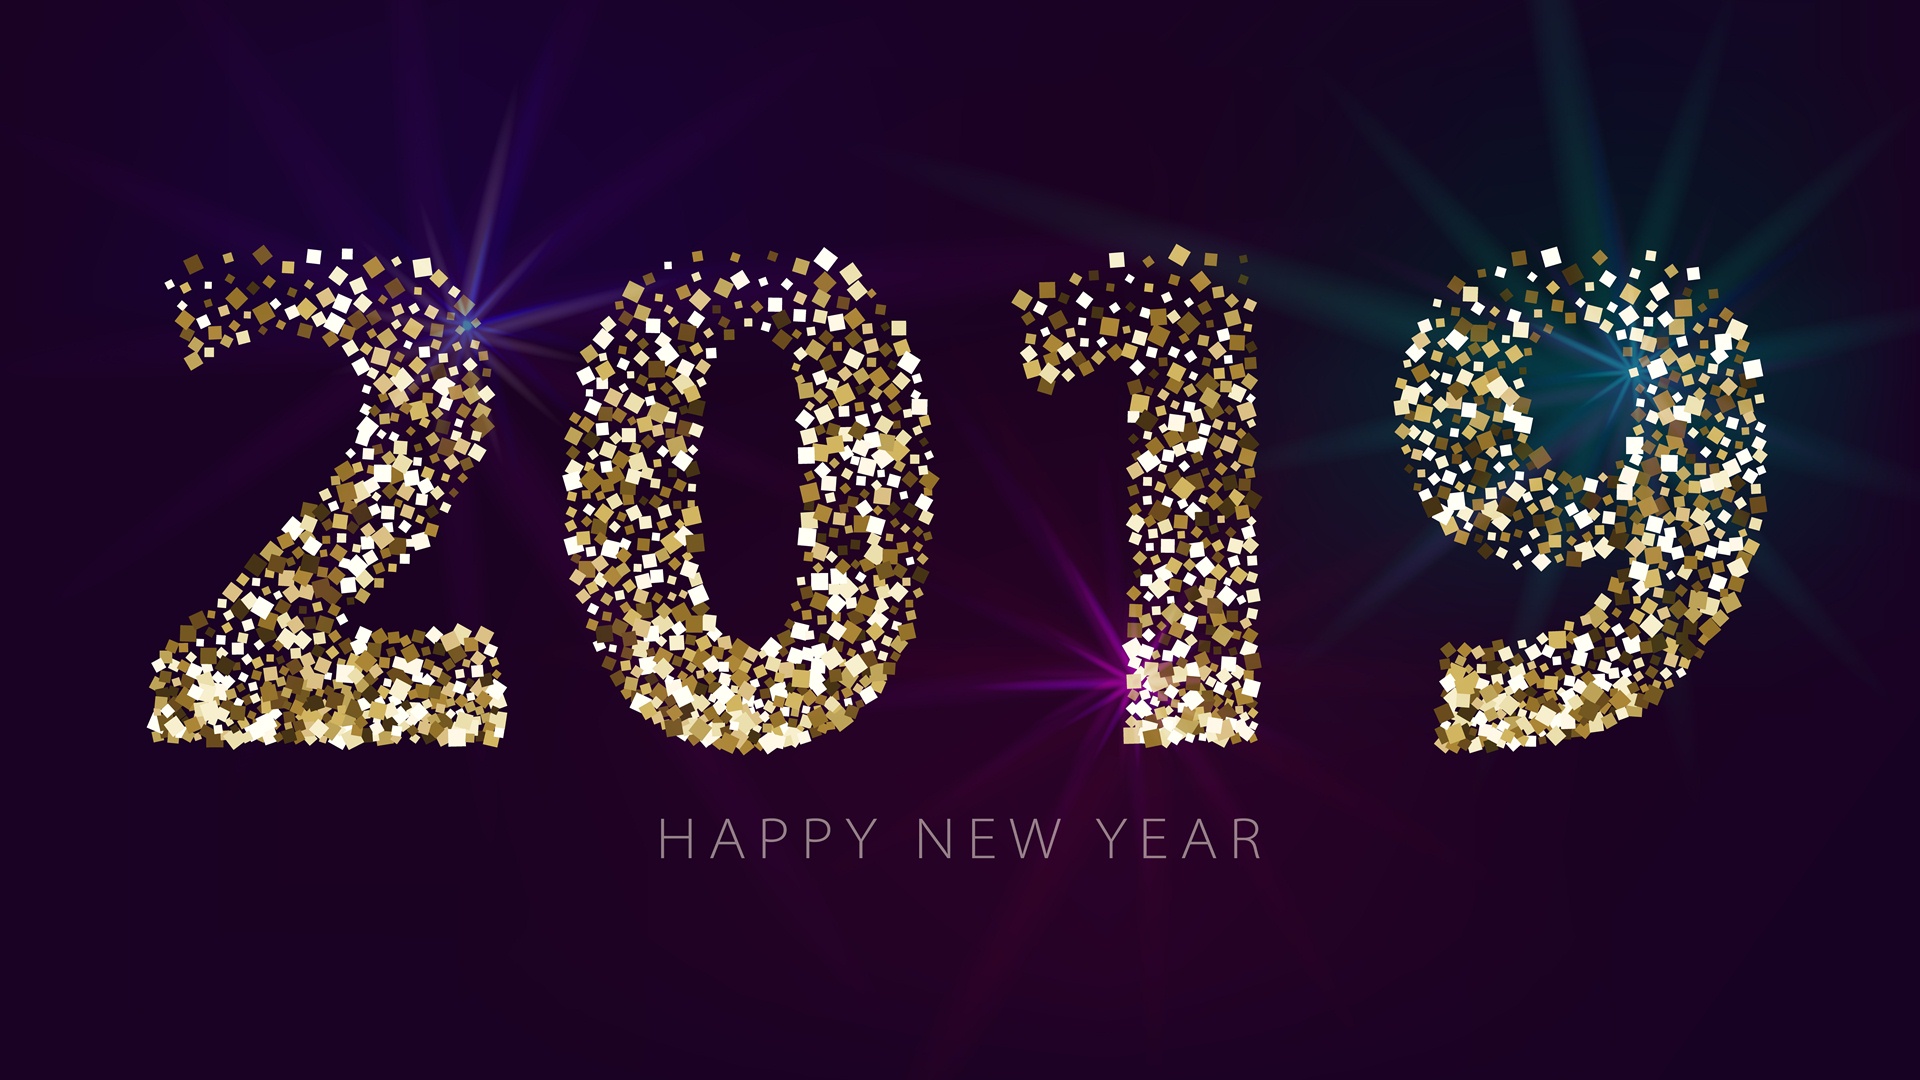 2019 New Year Wallpaper - New Year Wallpapers 2019 , HD Wallpaper & Backgrounds